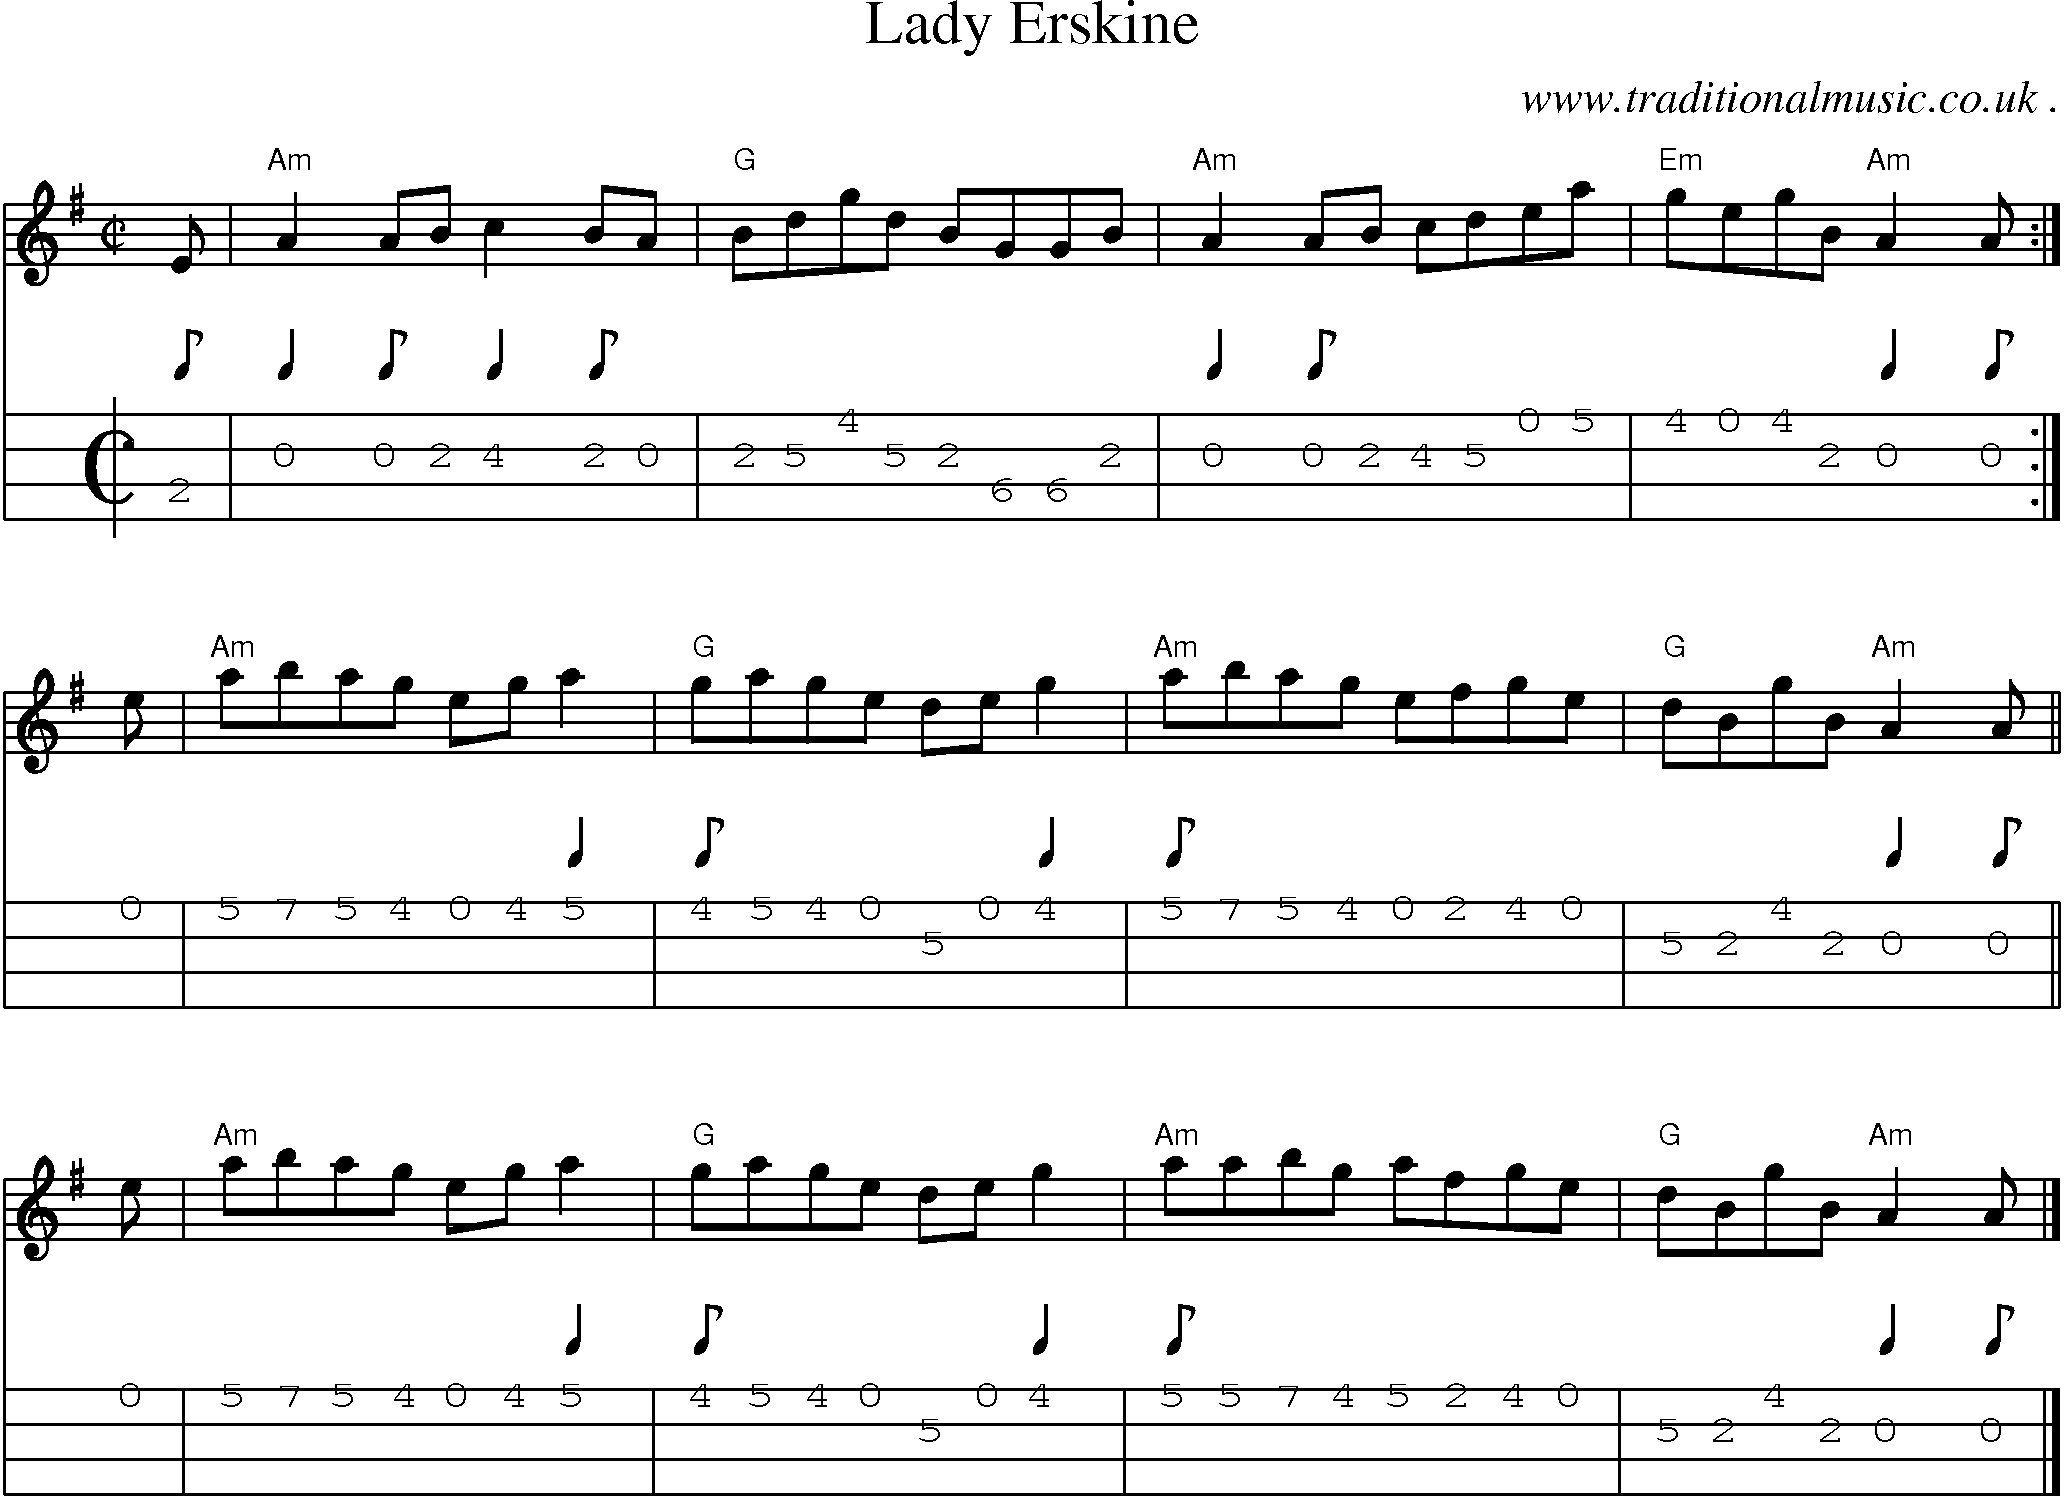 Sheet-music  score, Chords and Mandolin Tabs for Lady Erskine